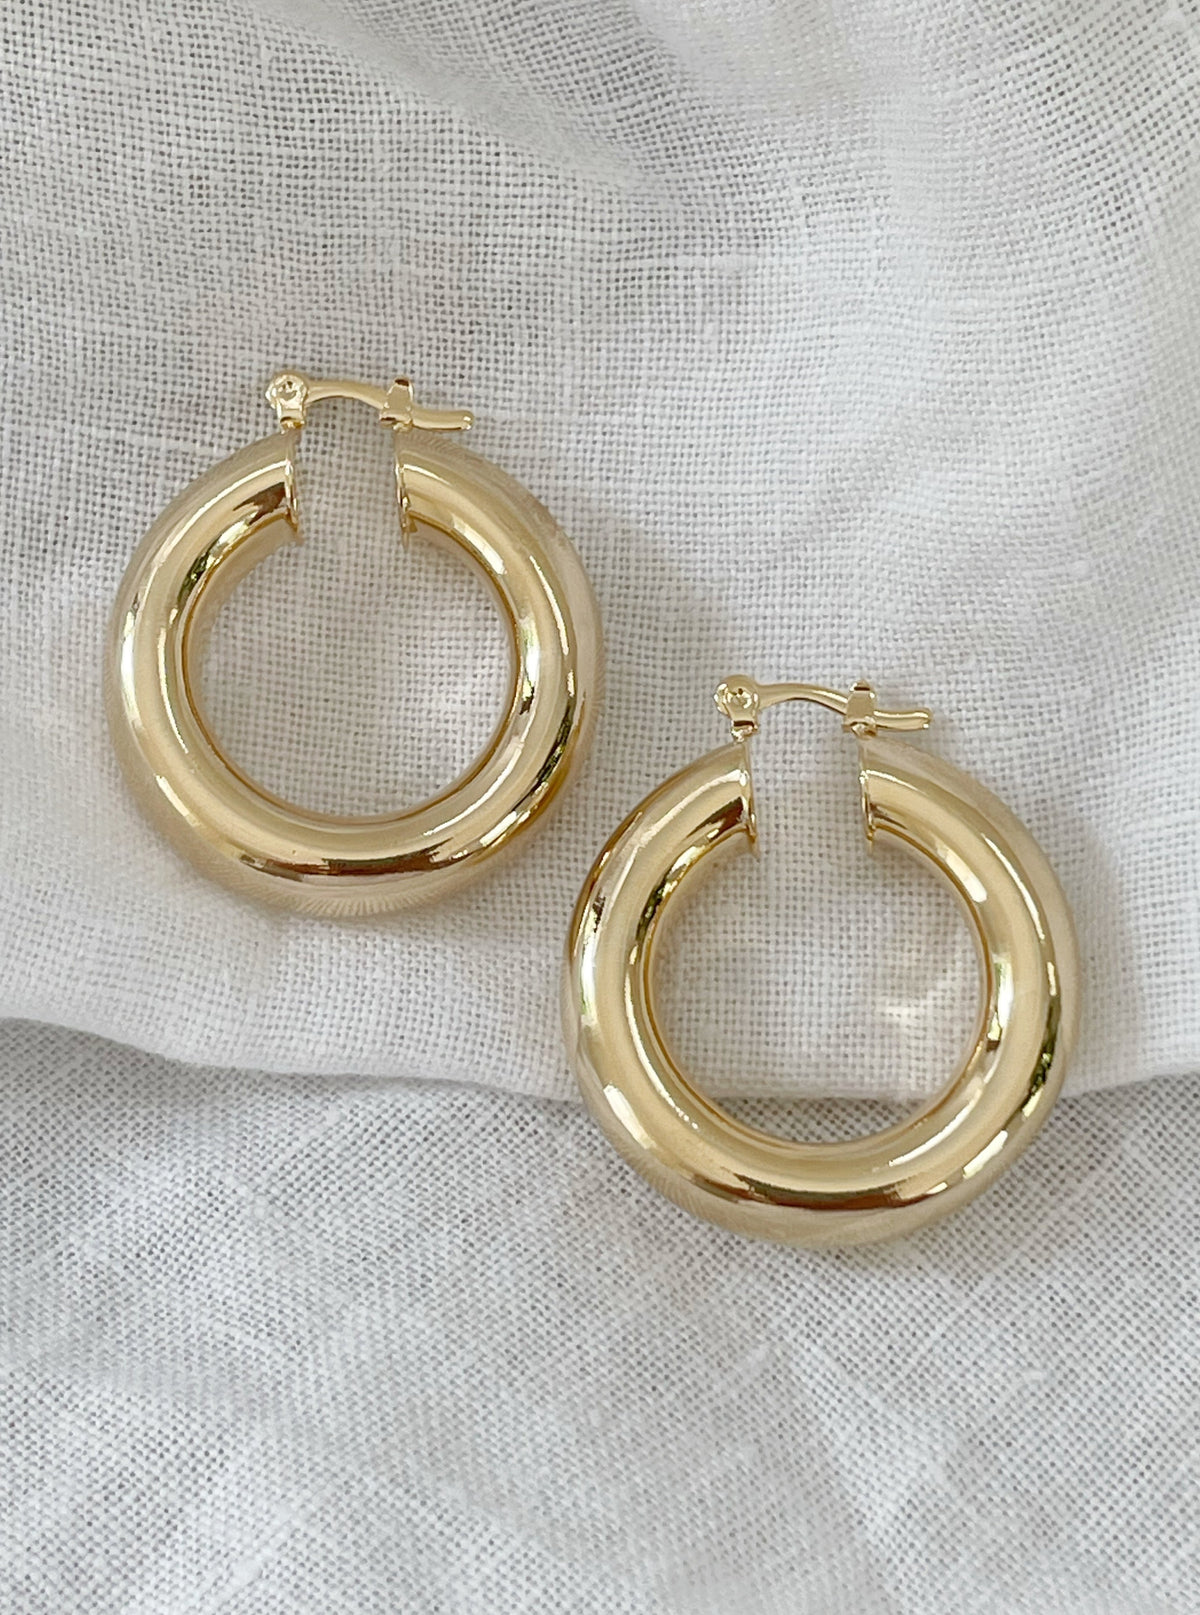 Cleo Hoop Earrings by Dylan Rae Jewelry, showcasing versatile style and lightweight design.